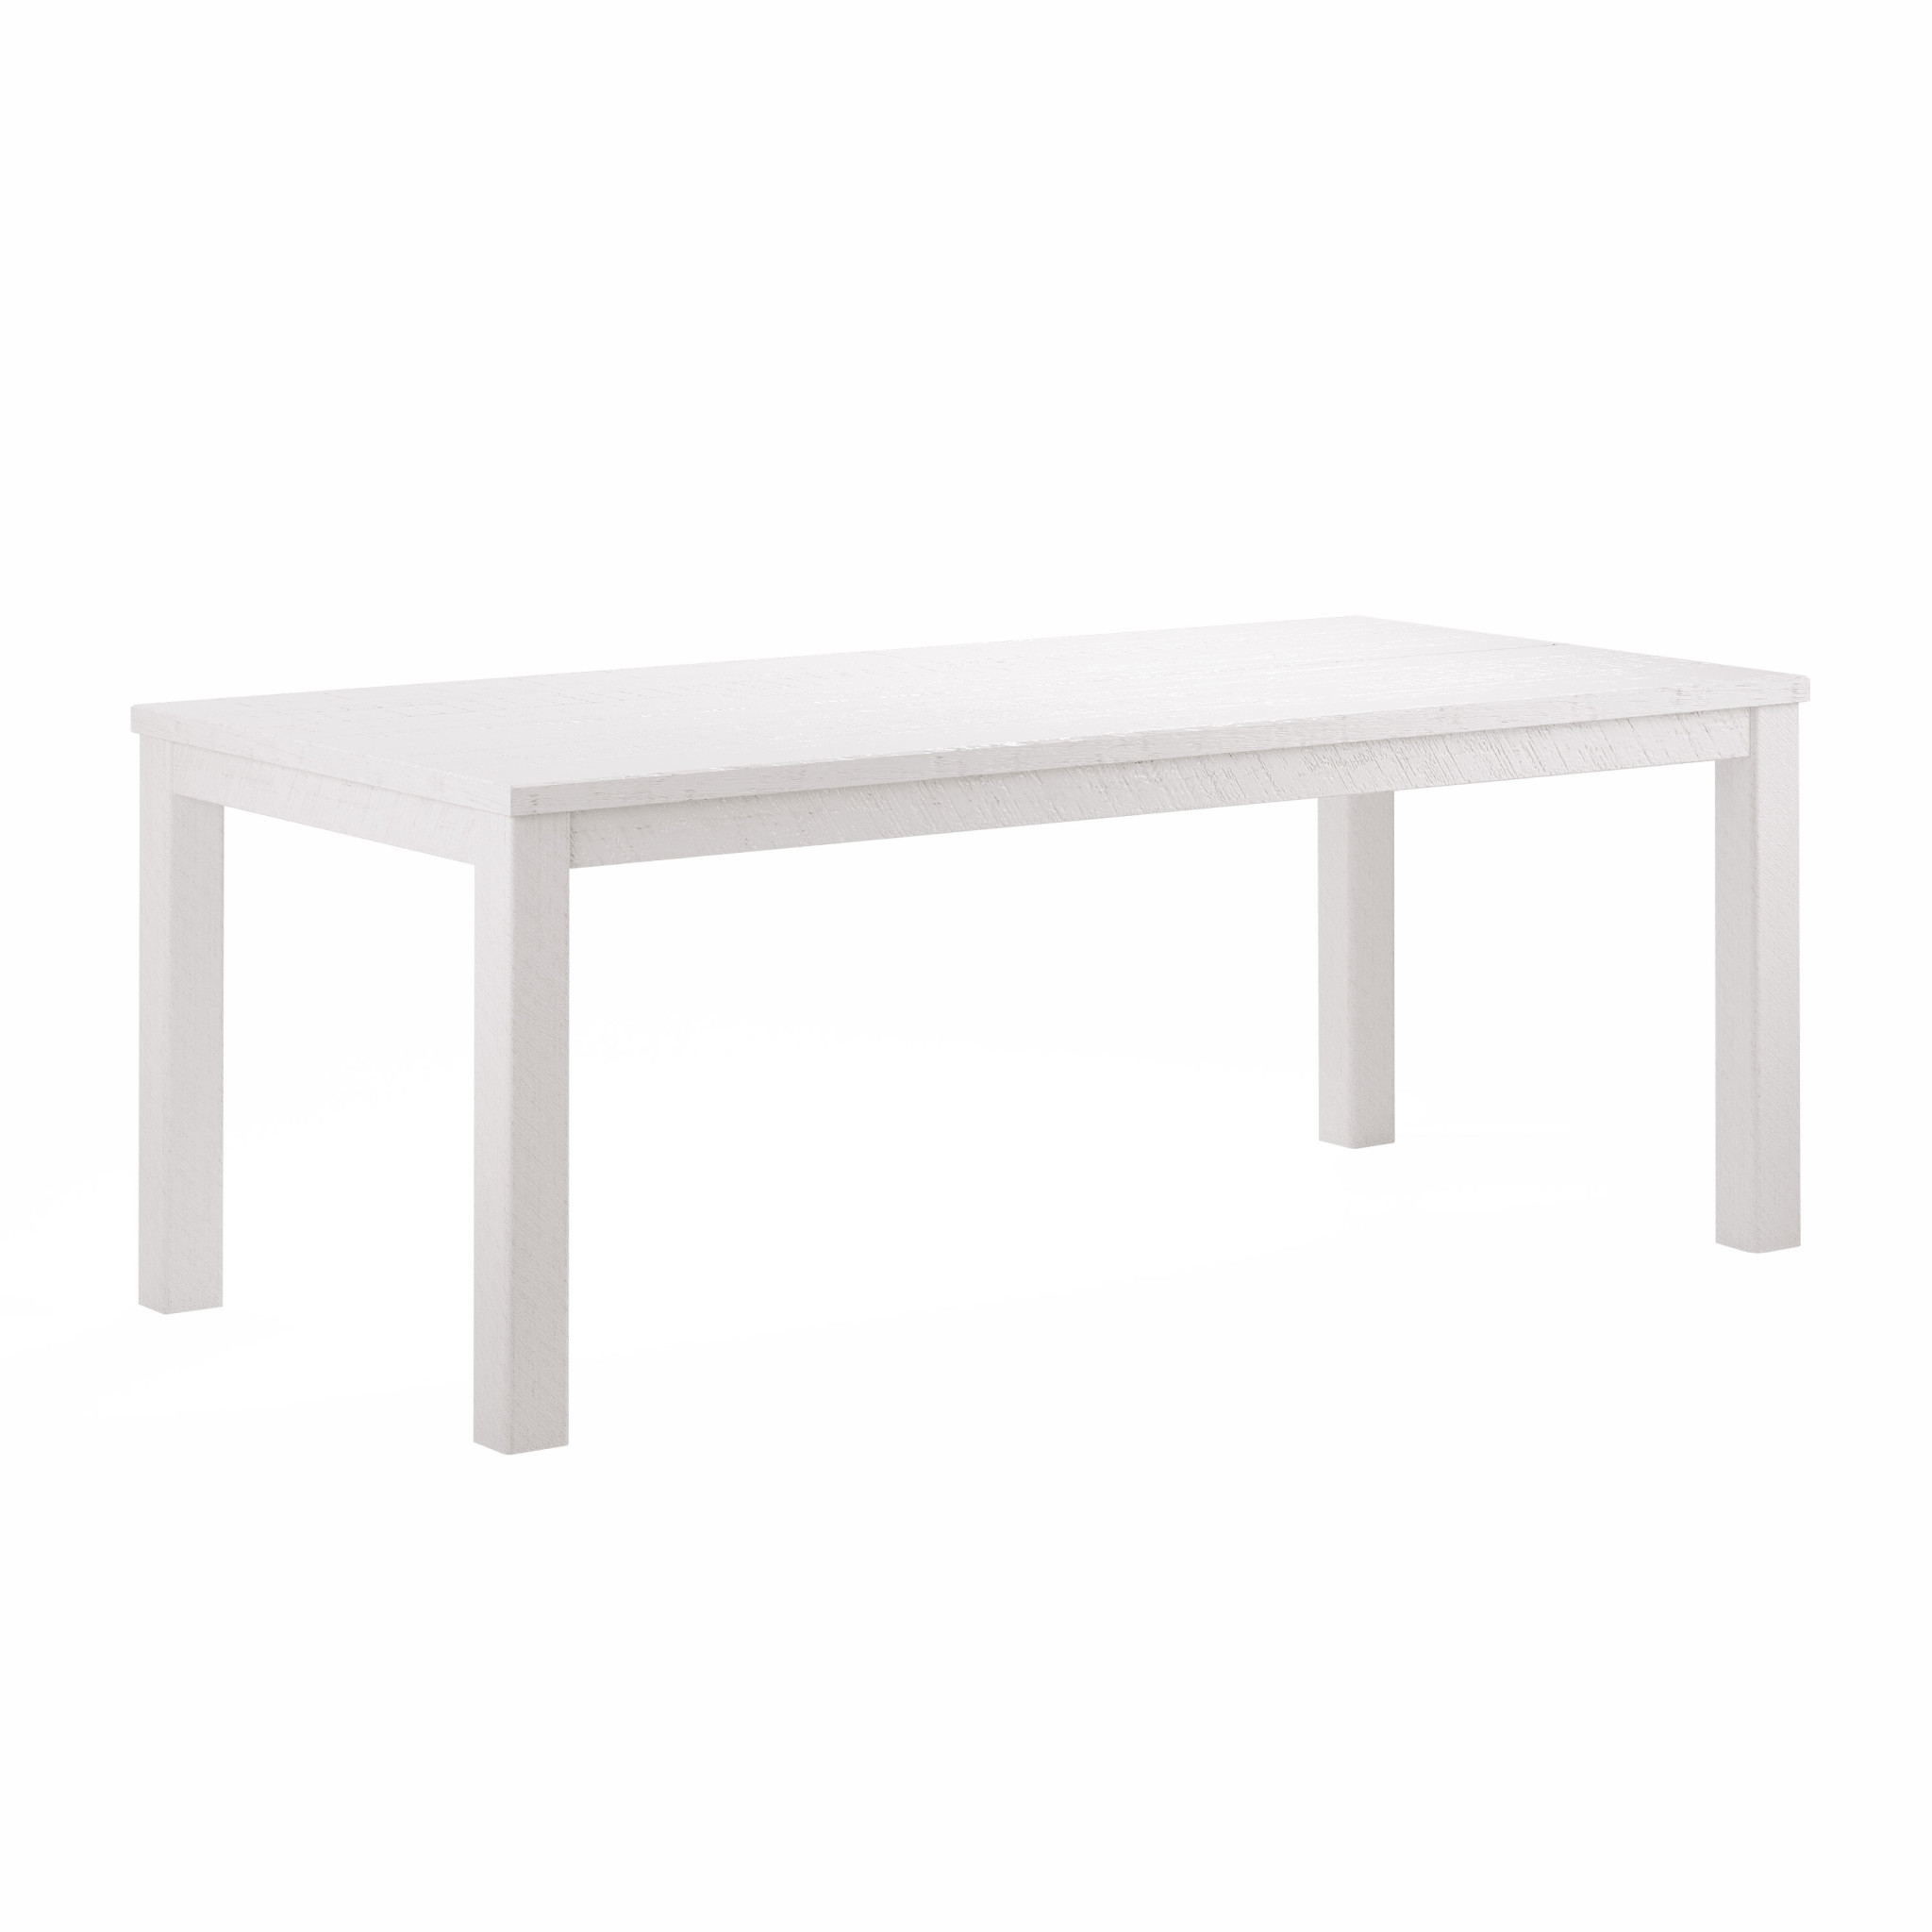 35" White Solid Wood Dining Table-518912-1